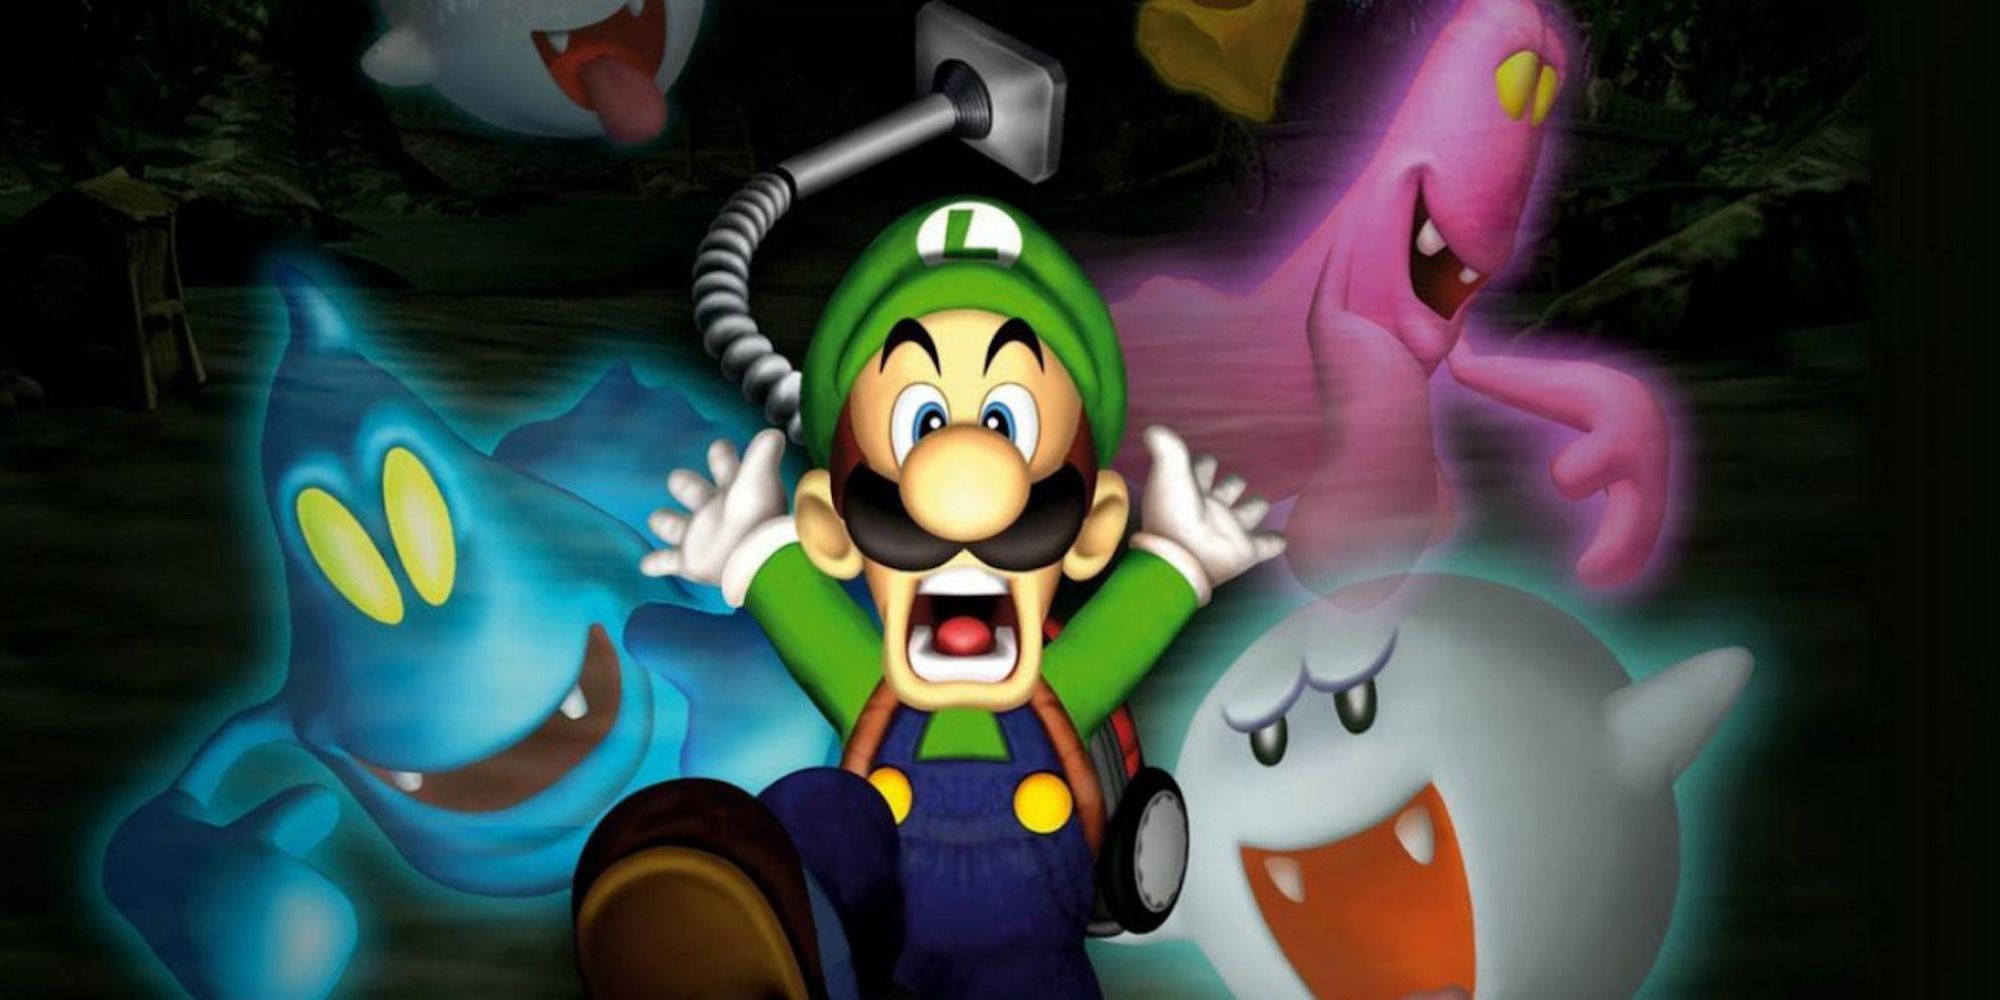 Promo art featuring characters from Luigi’s Mansion